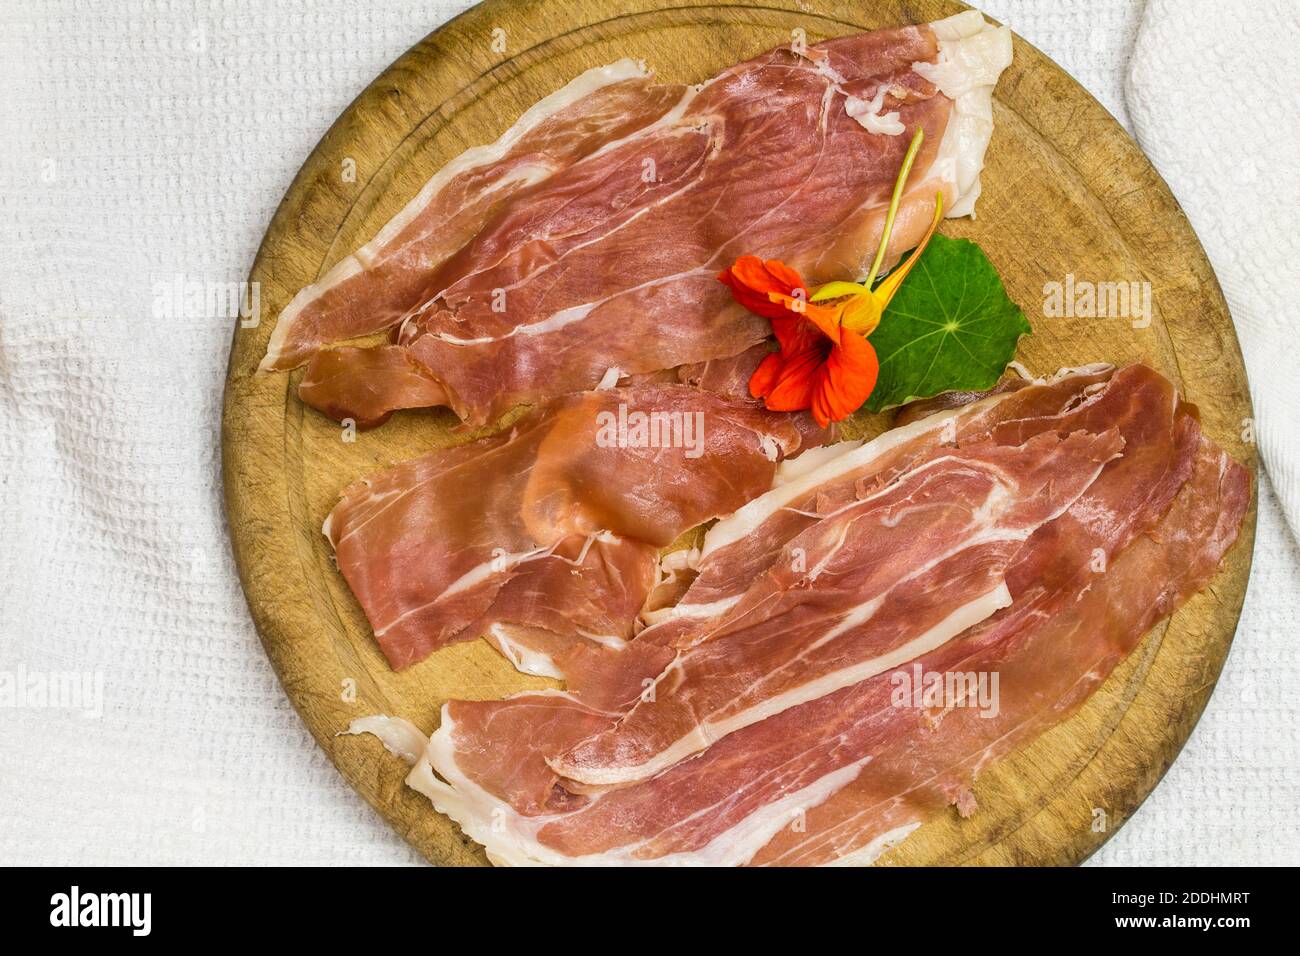 prosciutto slices on rustic wooden board with caper leaf and flower - top view image with copy space Stock Photo